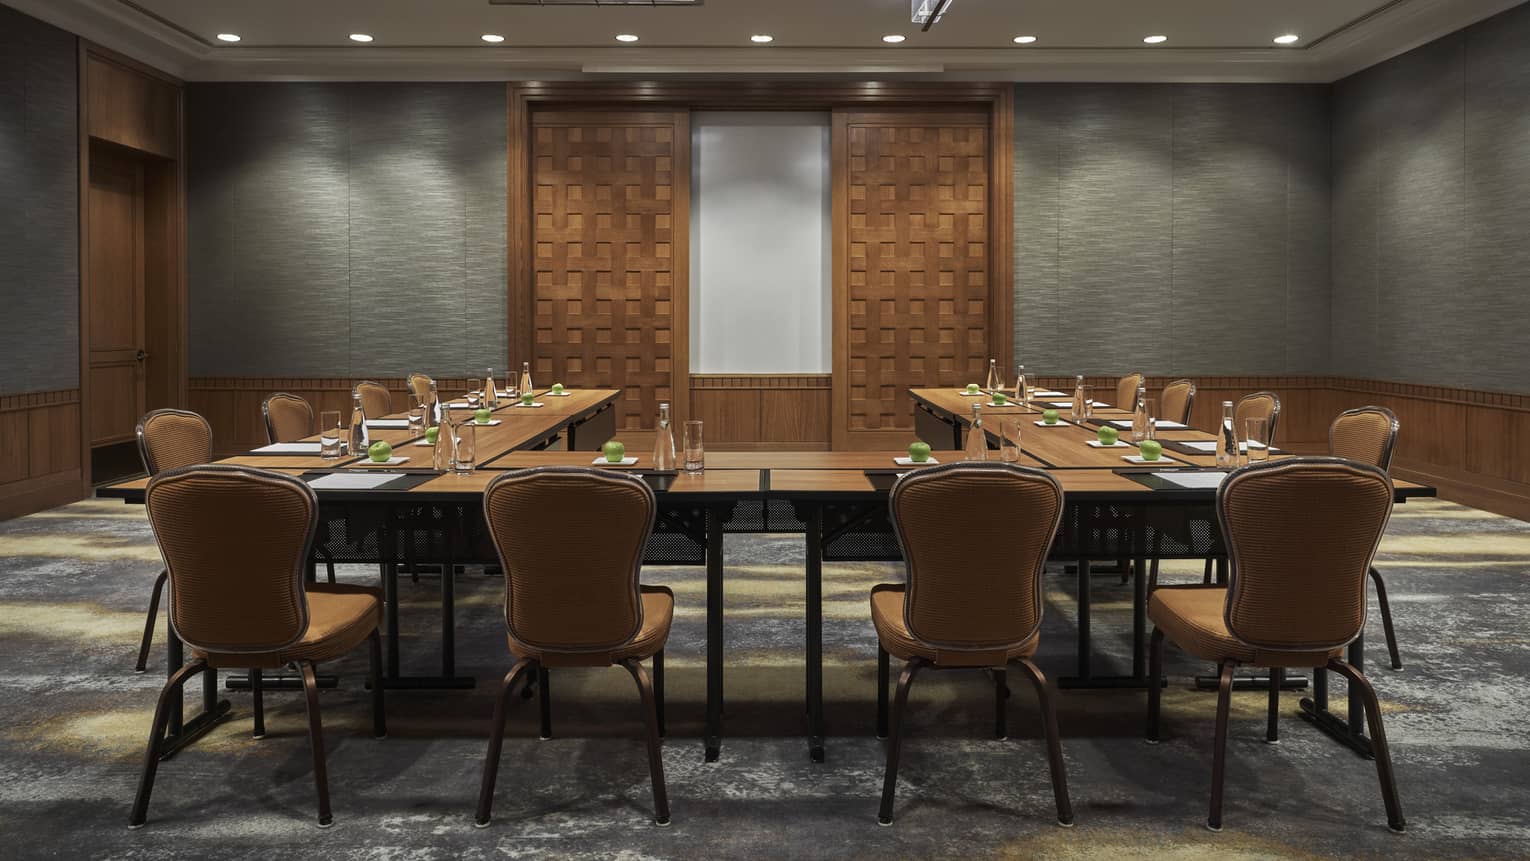 A boardroom surrounded by chairs.